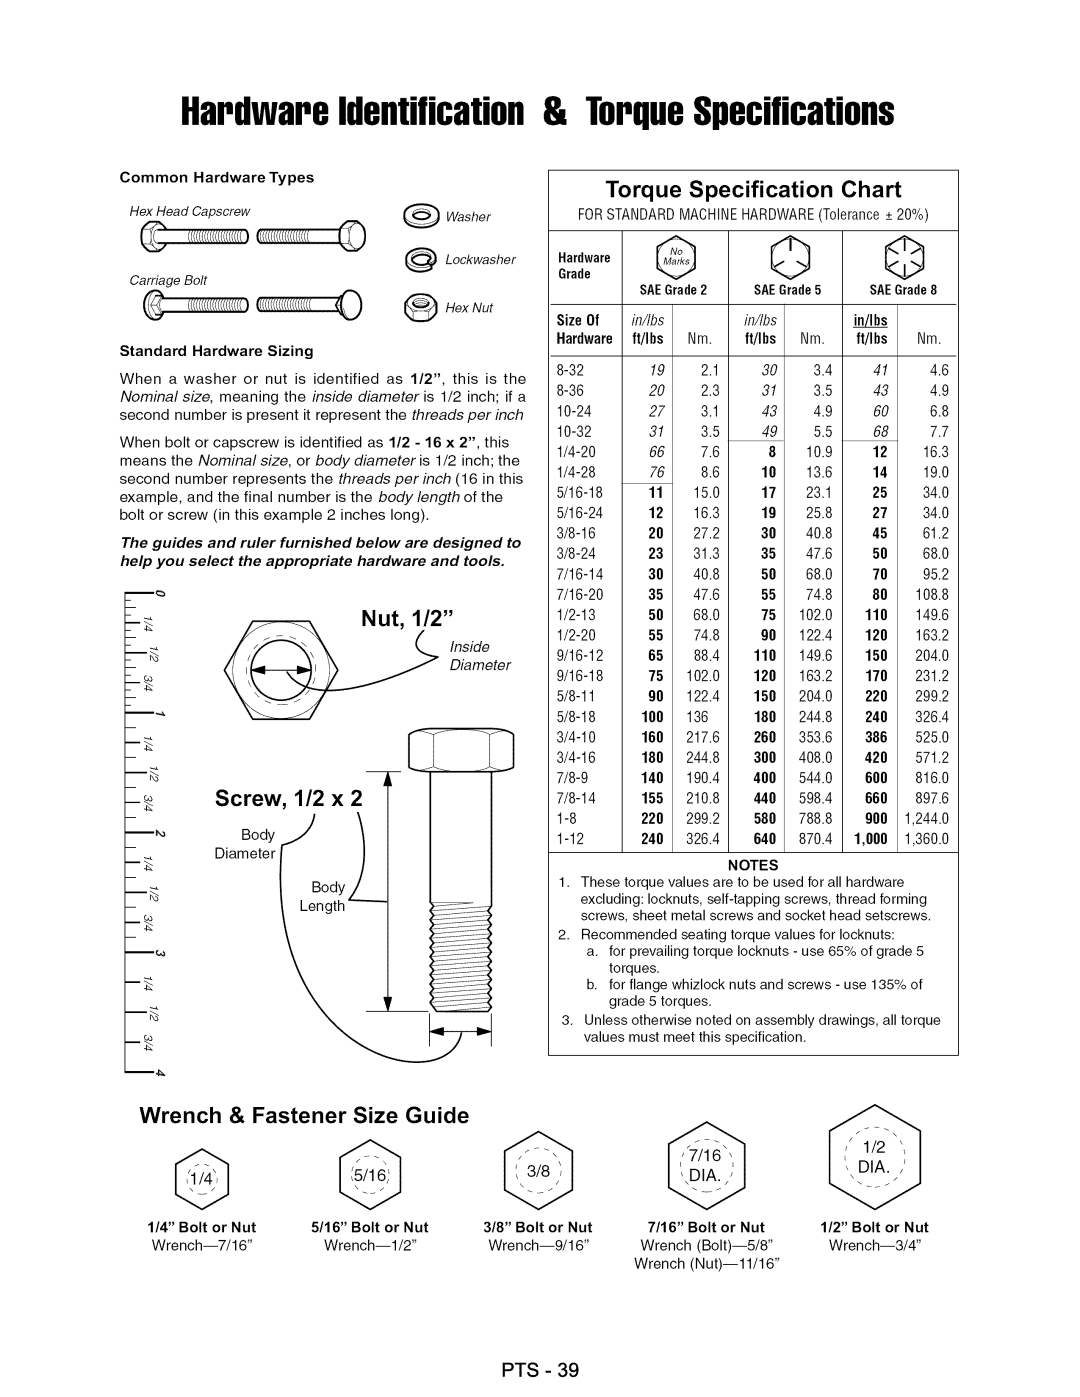 Craftsman ZTS 6000 manual od,J, Torque Specification Chart, Nut, 1/2, Screw, 1/2 x 2 _i, Wrench & Fastener Size Guide, eter 